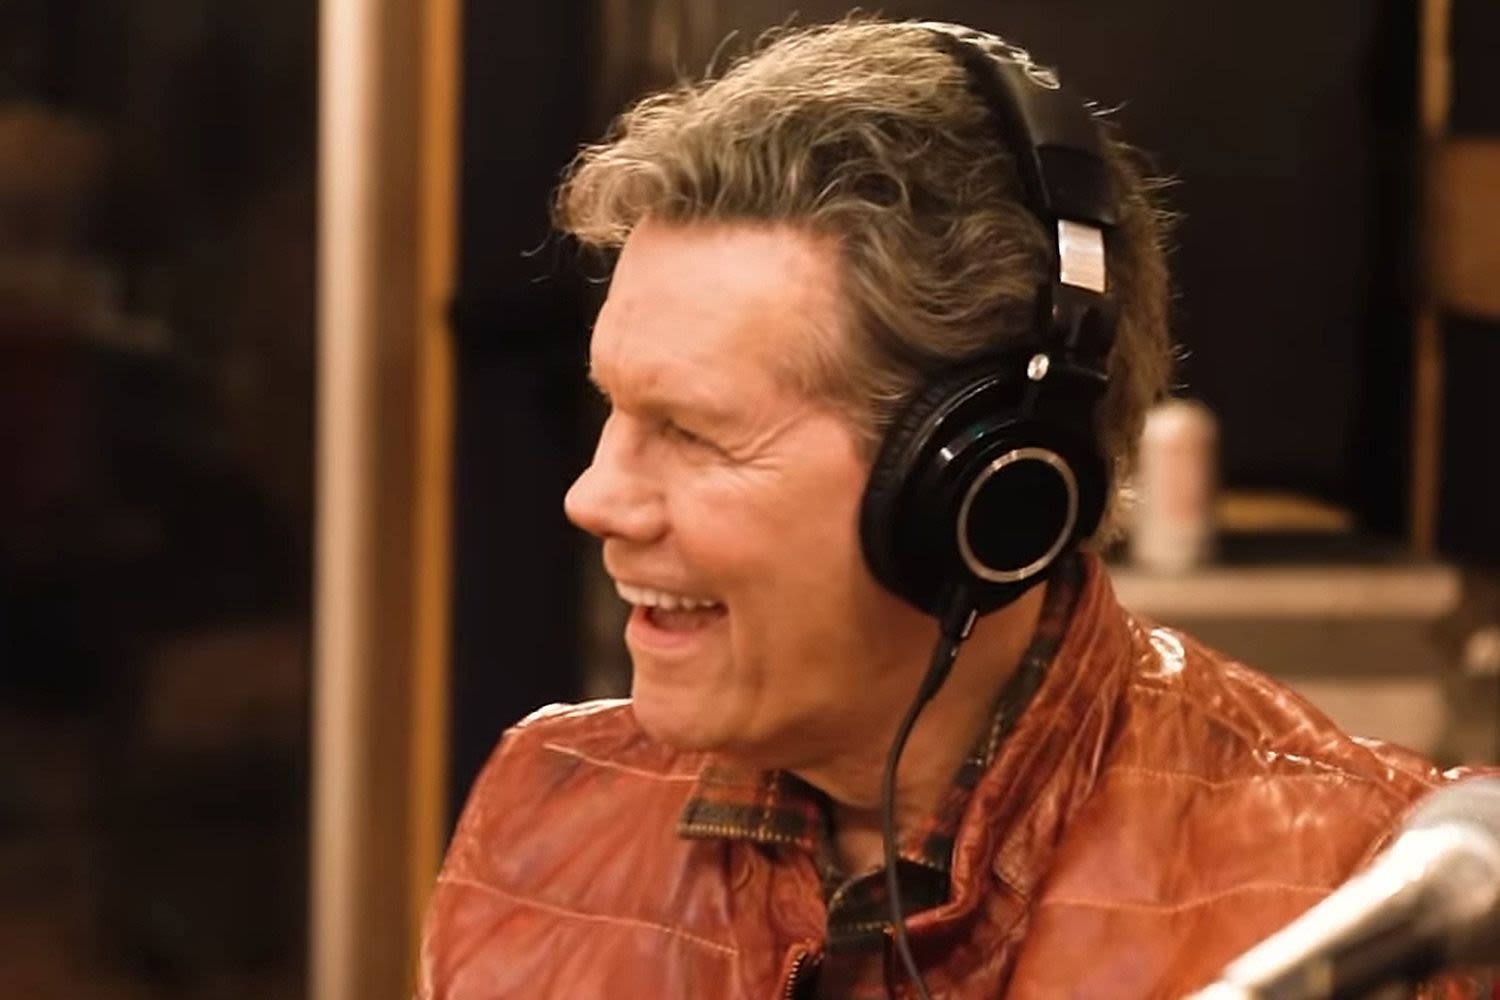 Randy Travis to Release First New Recording Since Before His 2013 Stroke: 'Magical Moment in My Career'